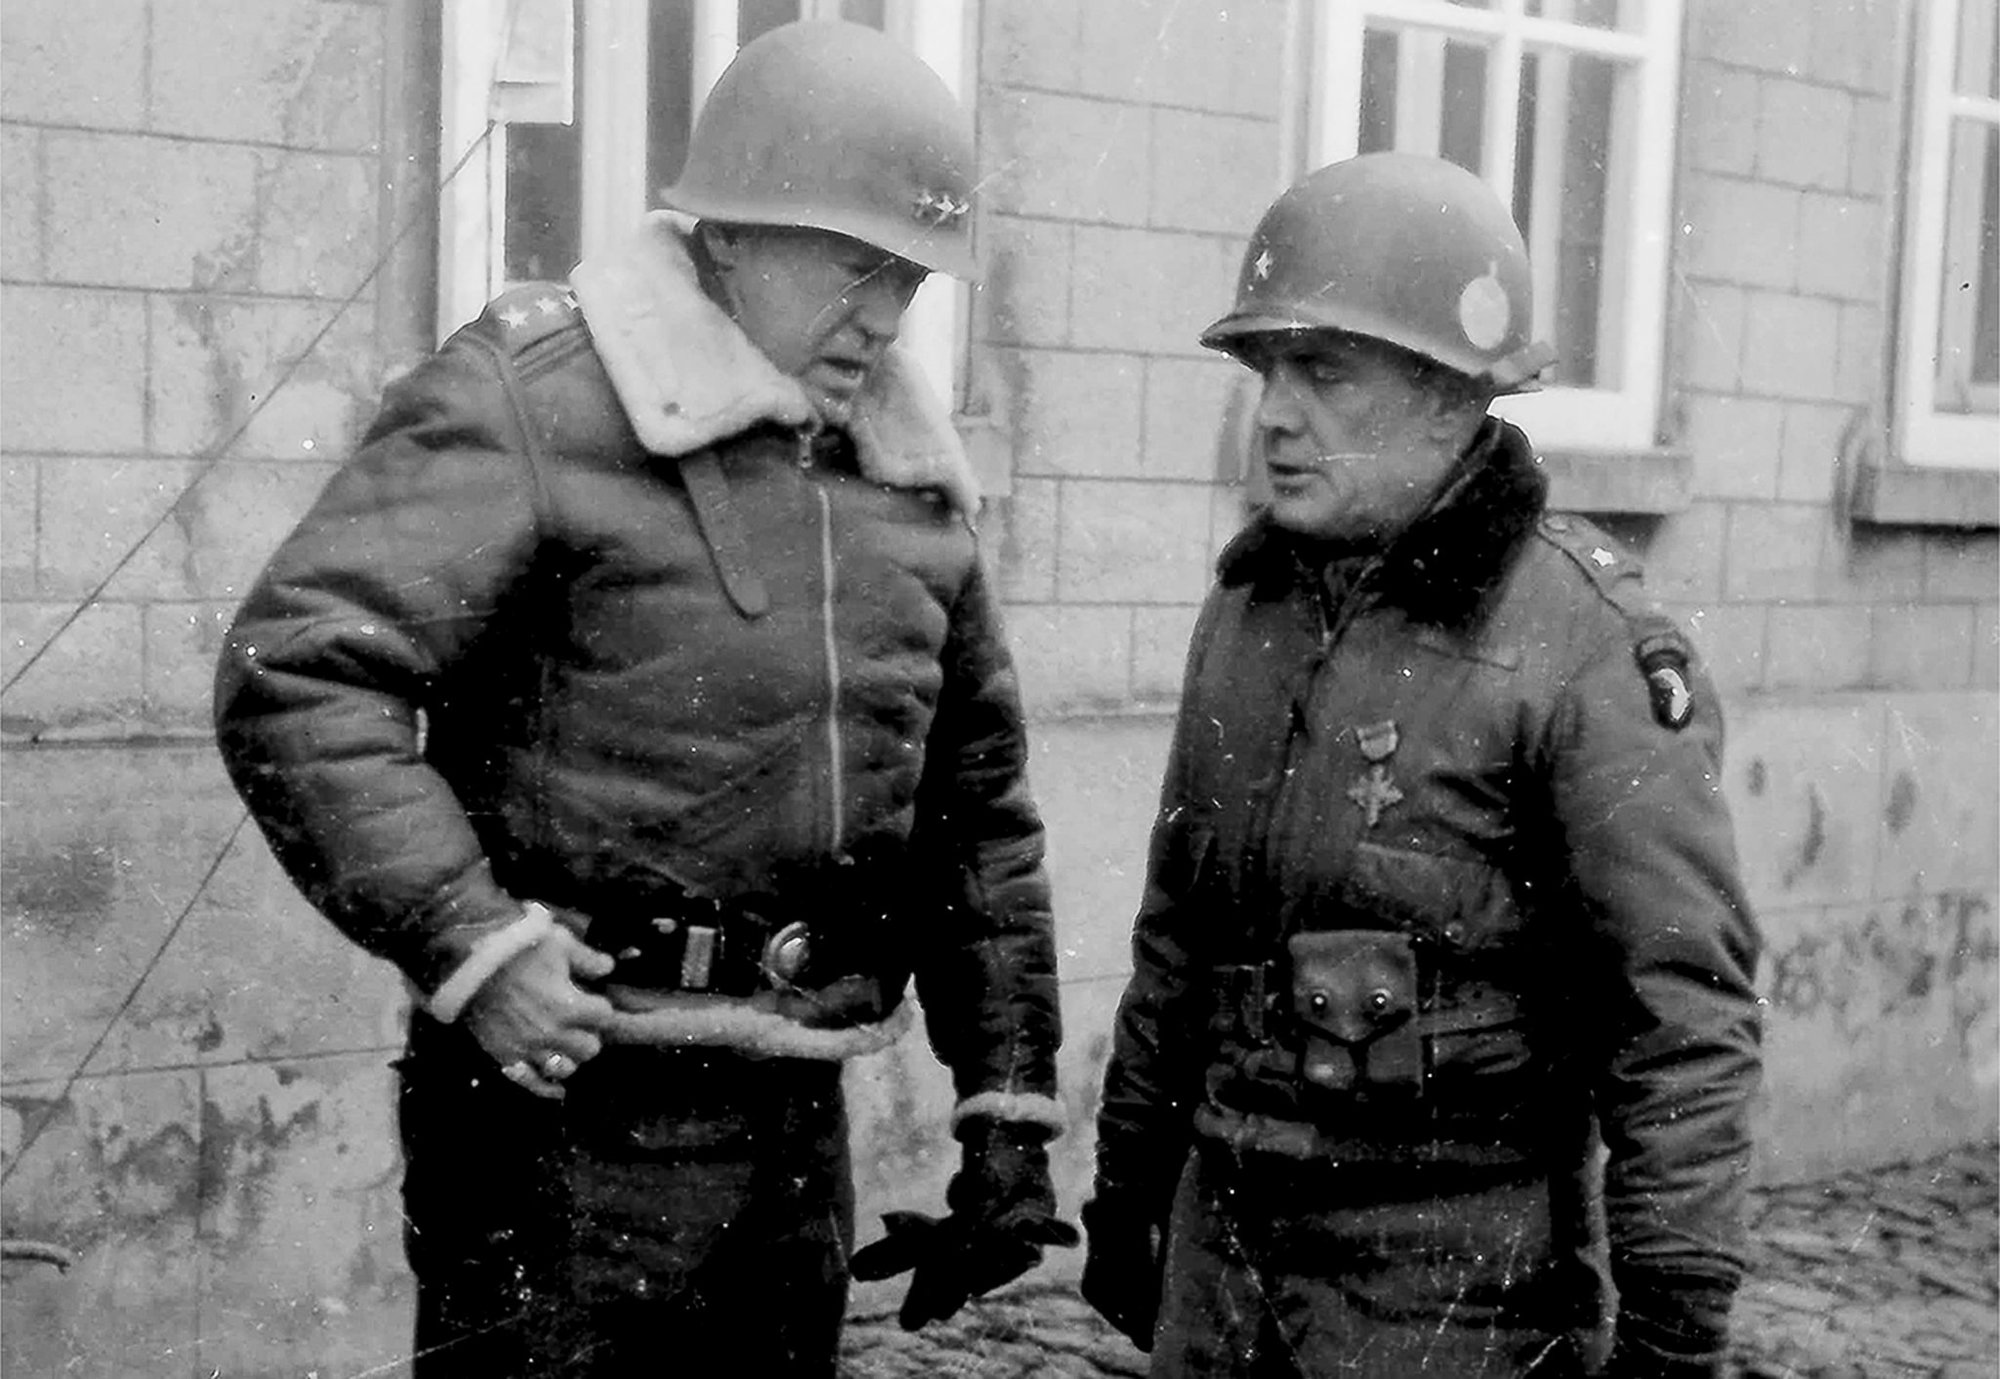 Lt. Gen. George S. Patton speaks to Brig. Gen. Anthony McAuliffe, January 1945. Patton led the Third Army in a sweep across France and an instrumental role in defeating the German counter offensive in the Ardennes. Patton commanded the Third Army from 1944 to 1945. Third Army’s unit motto “Patton’s Own – Third, Always First” is in honor of Patton. US Army photo